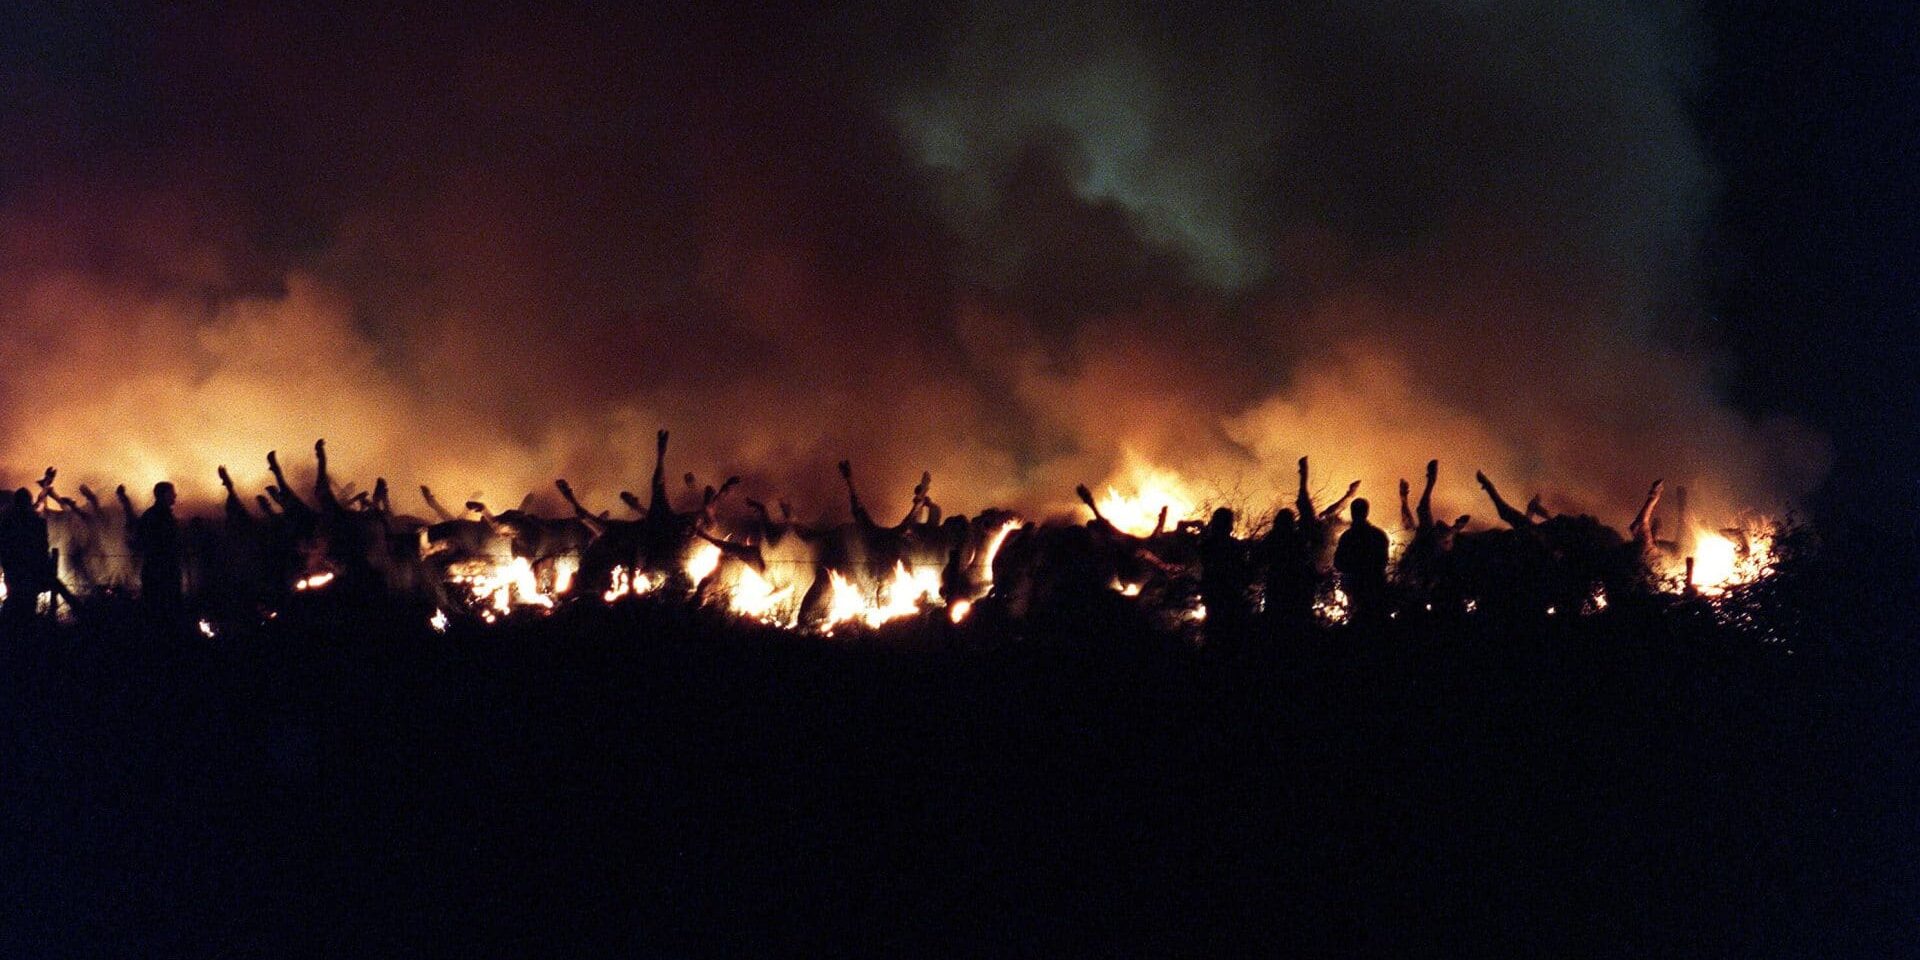 The British Ministry of Agriculture built funeral pyres for cows, like this one in Great Warley, Essex, during the foot and mouth disease crisis in February 2001. Photo by Tony Kyriacou / Shutterstock